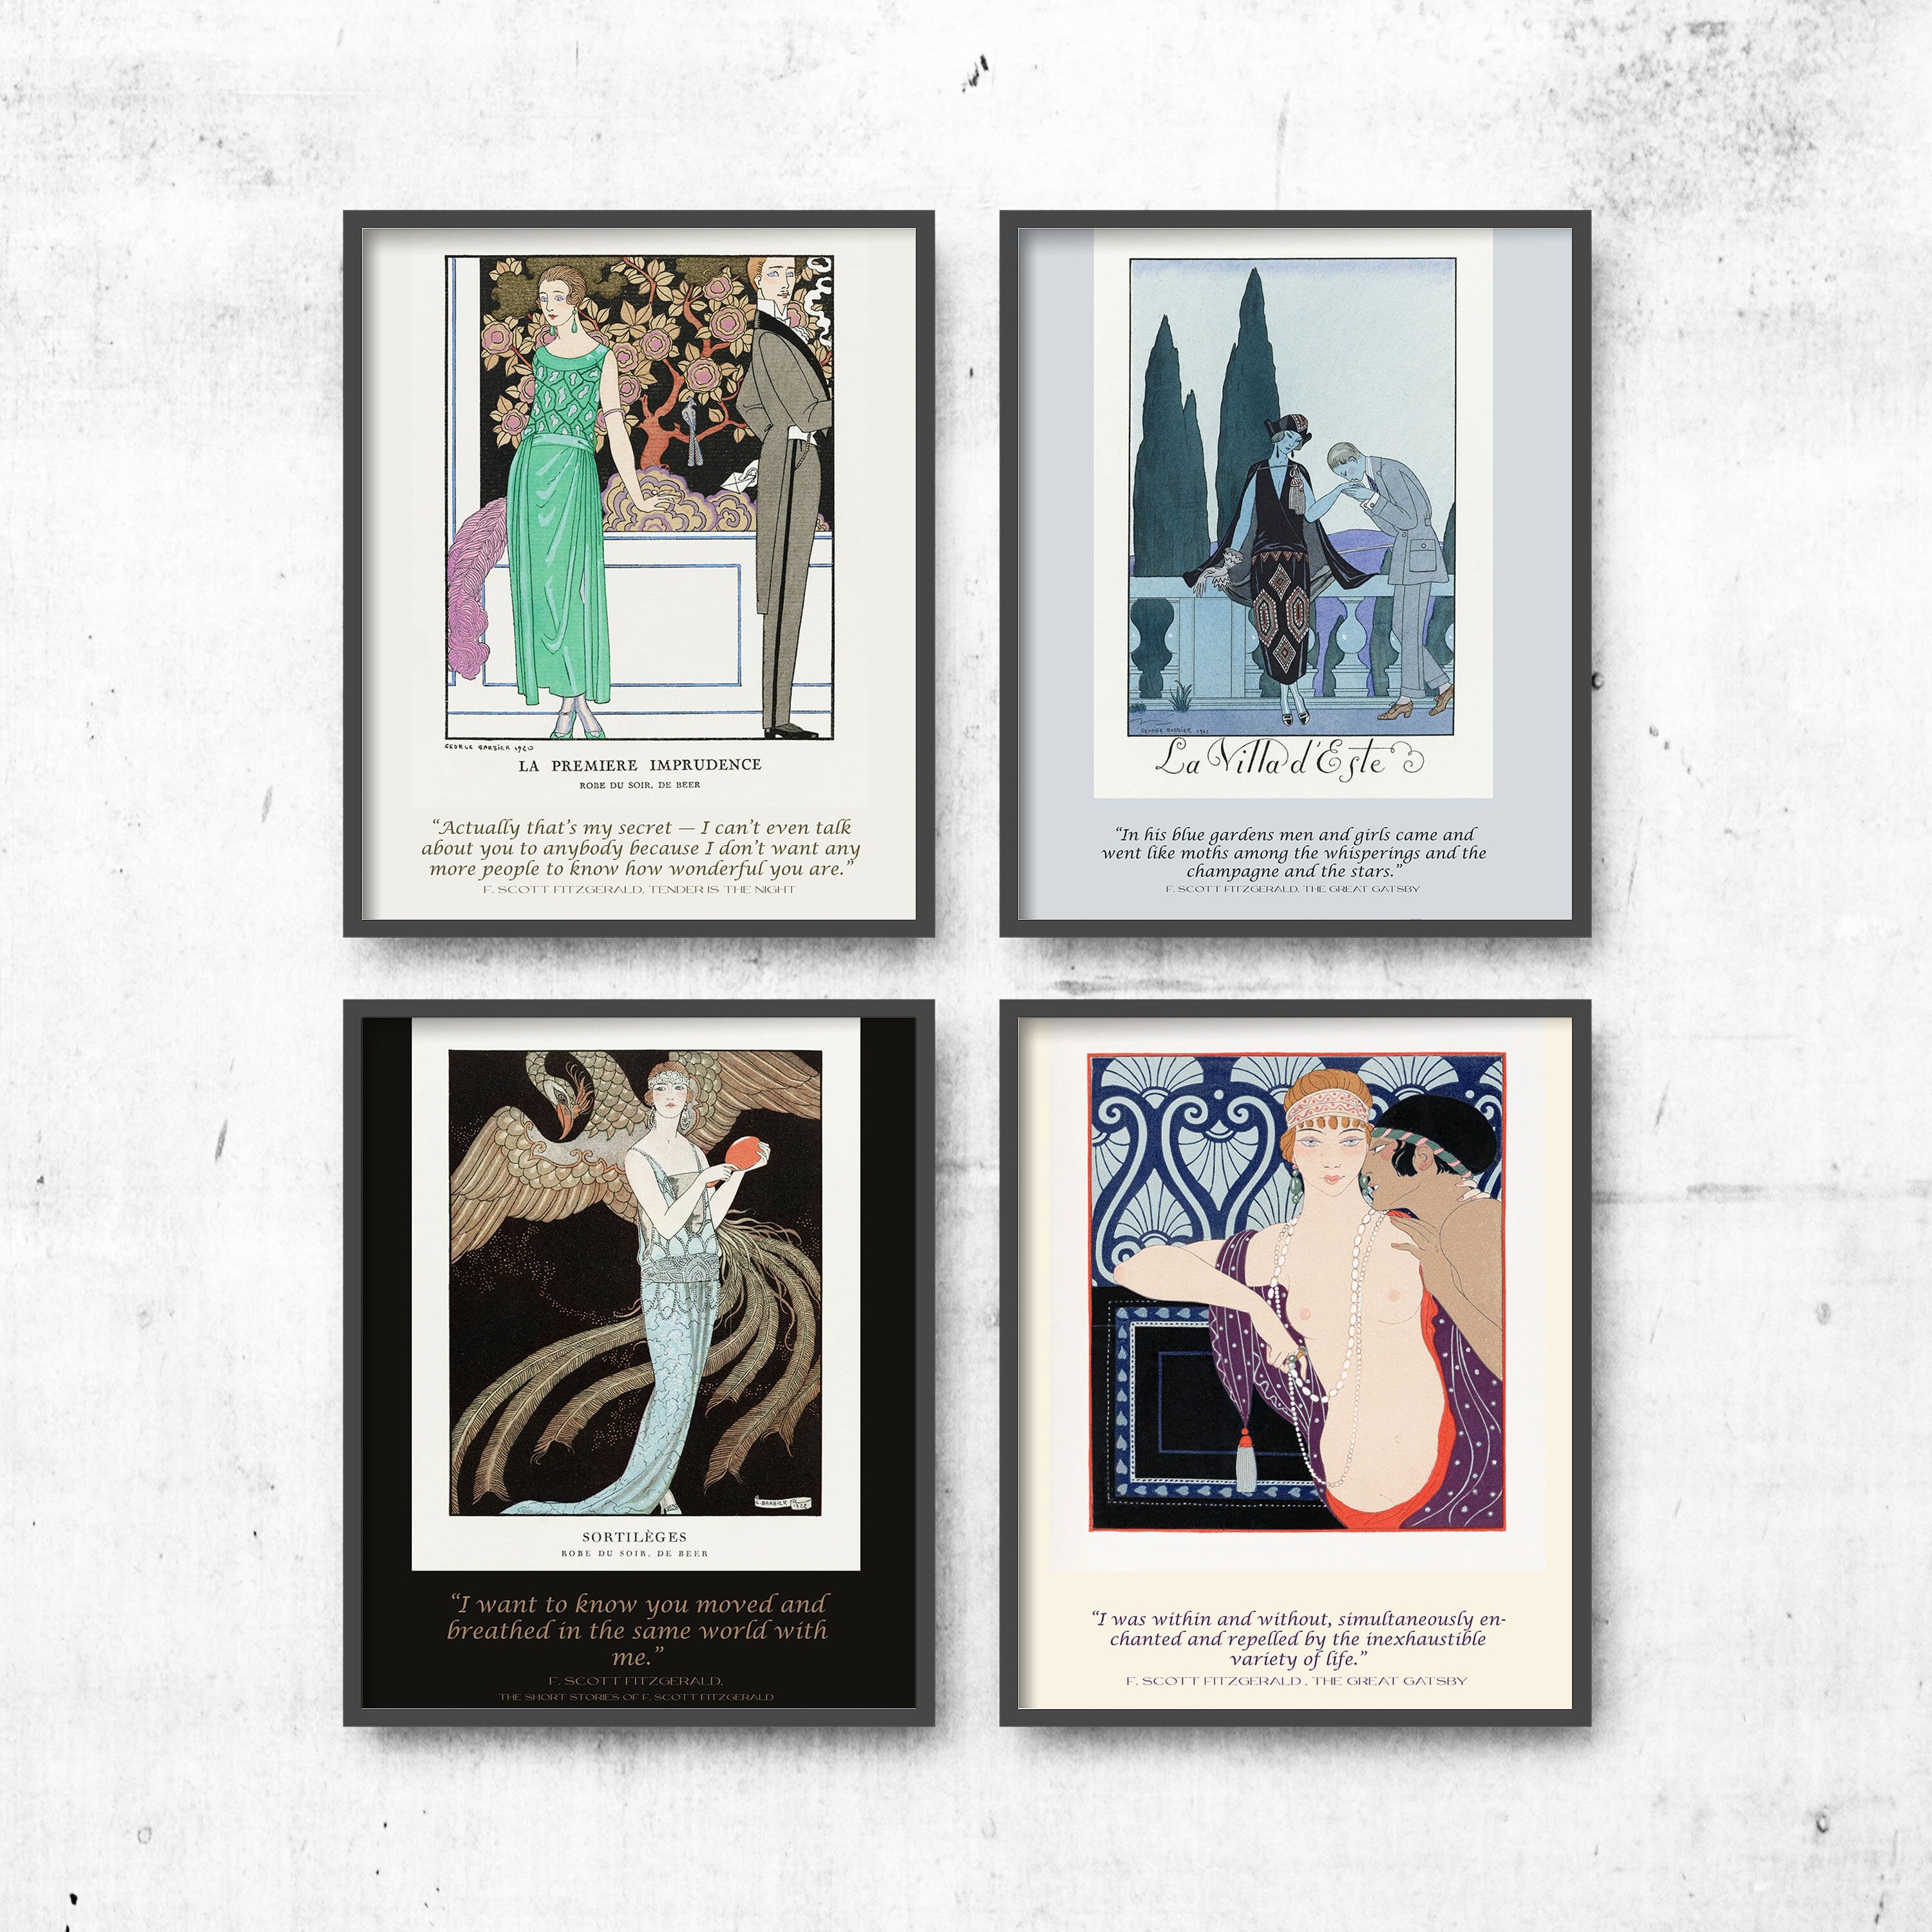 F Scott Fitzgerald Quote Prints Set of 4, Gallery Wall Set for Home Decor